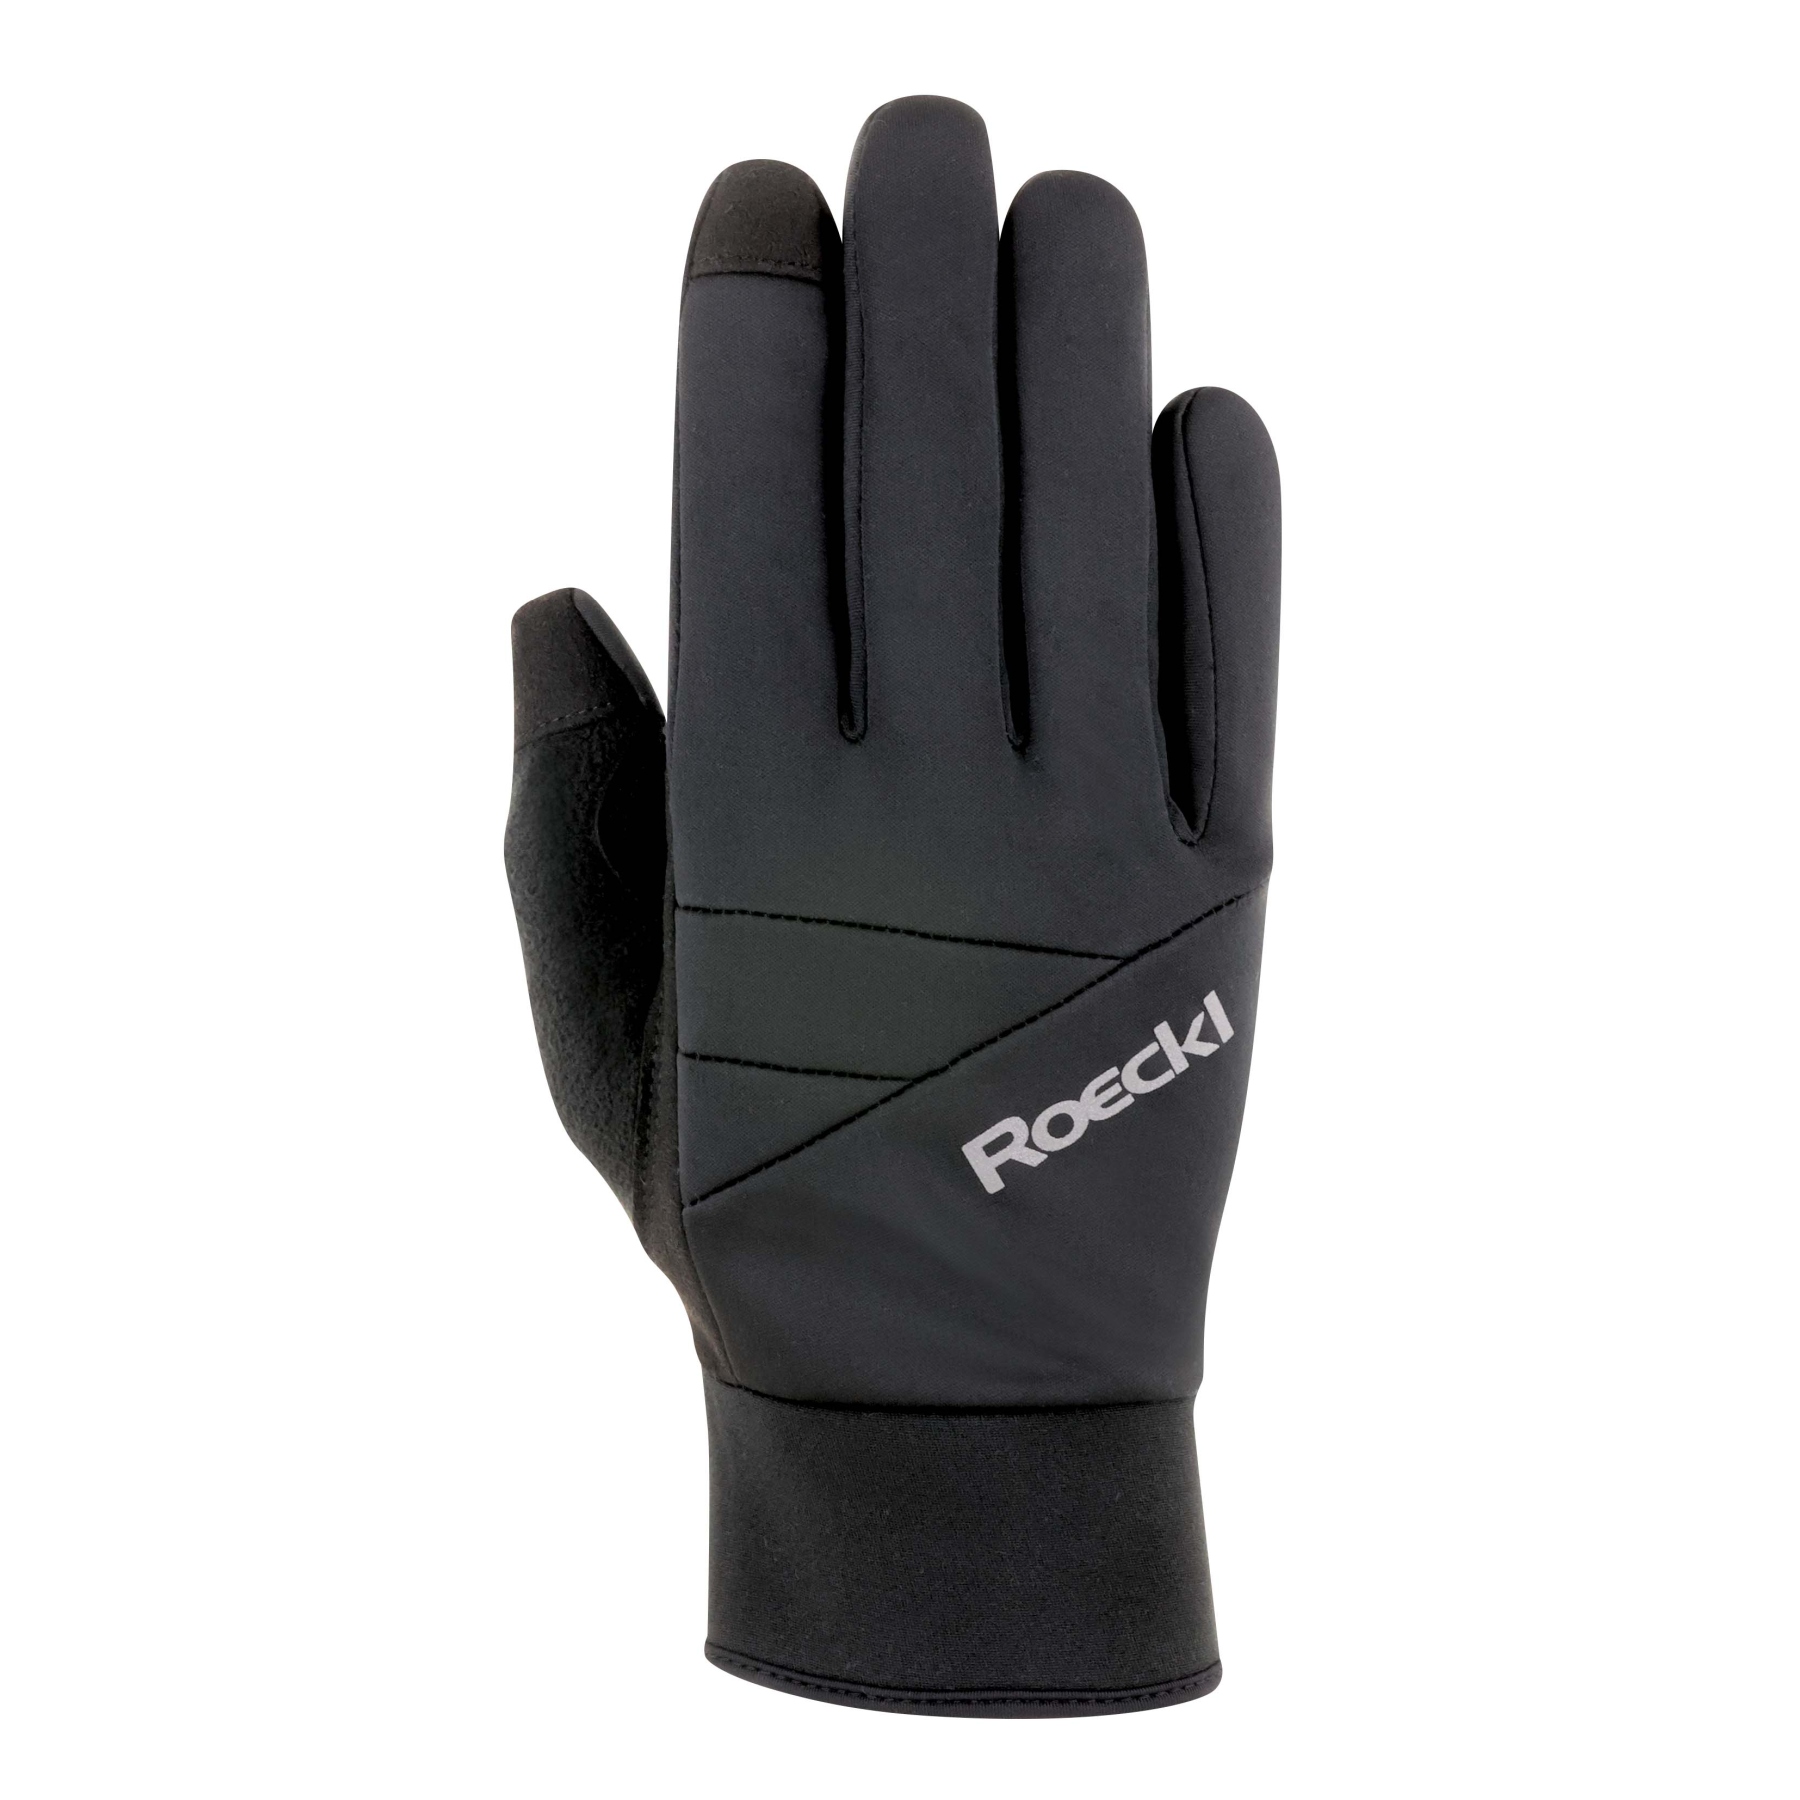 Image of Roeckl Sports Reichenthal Cycling Gloves - black 9000